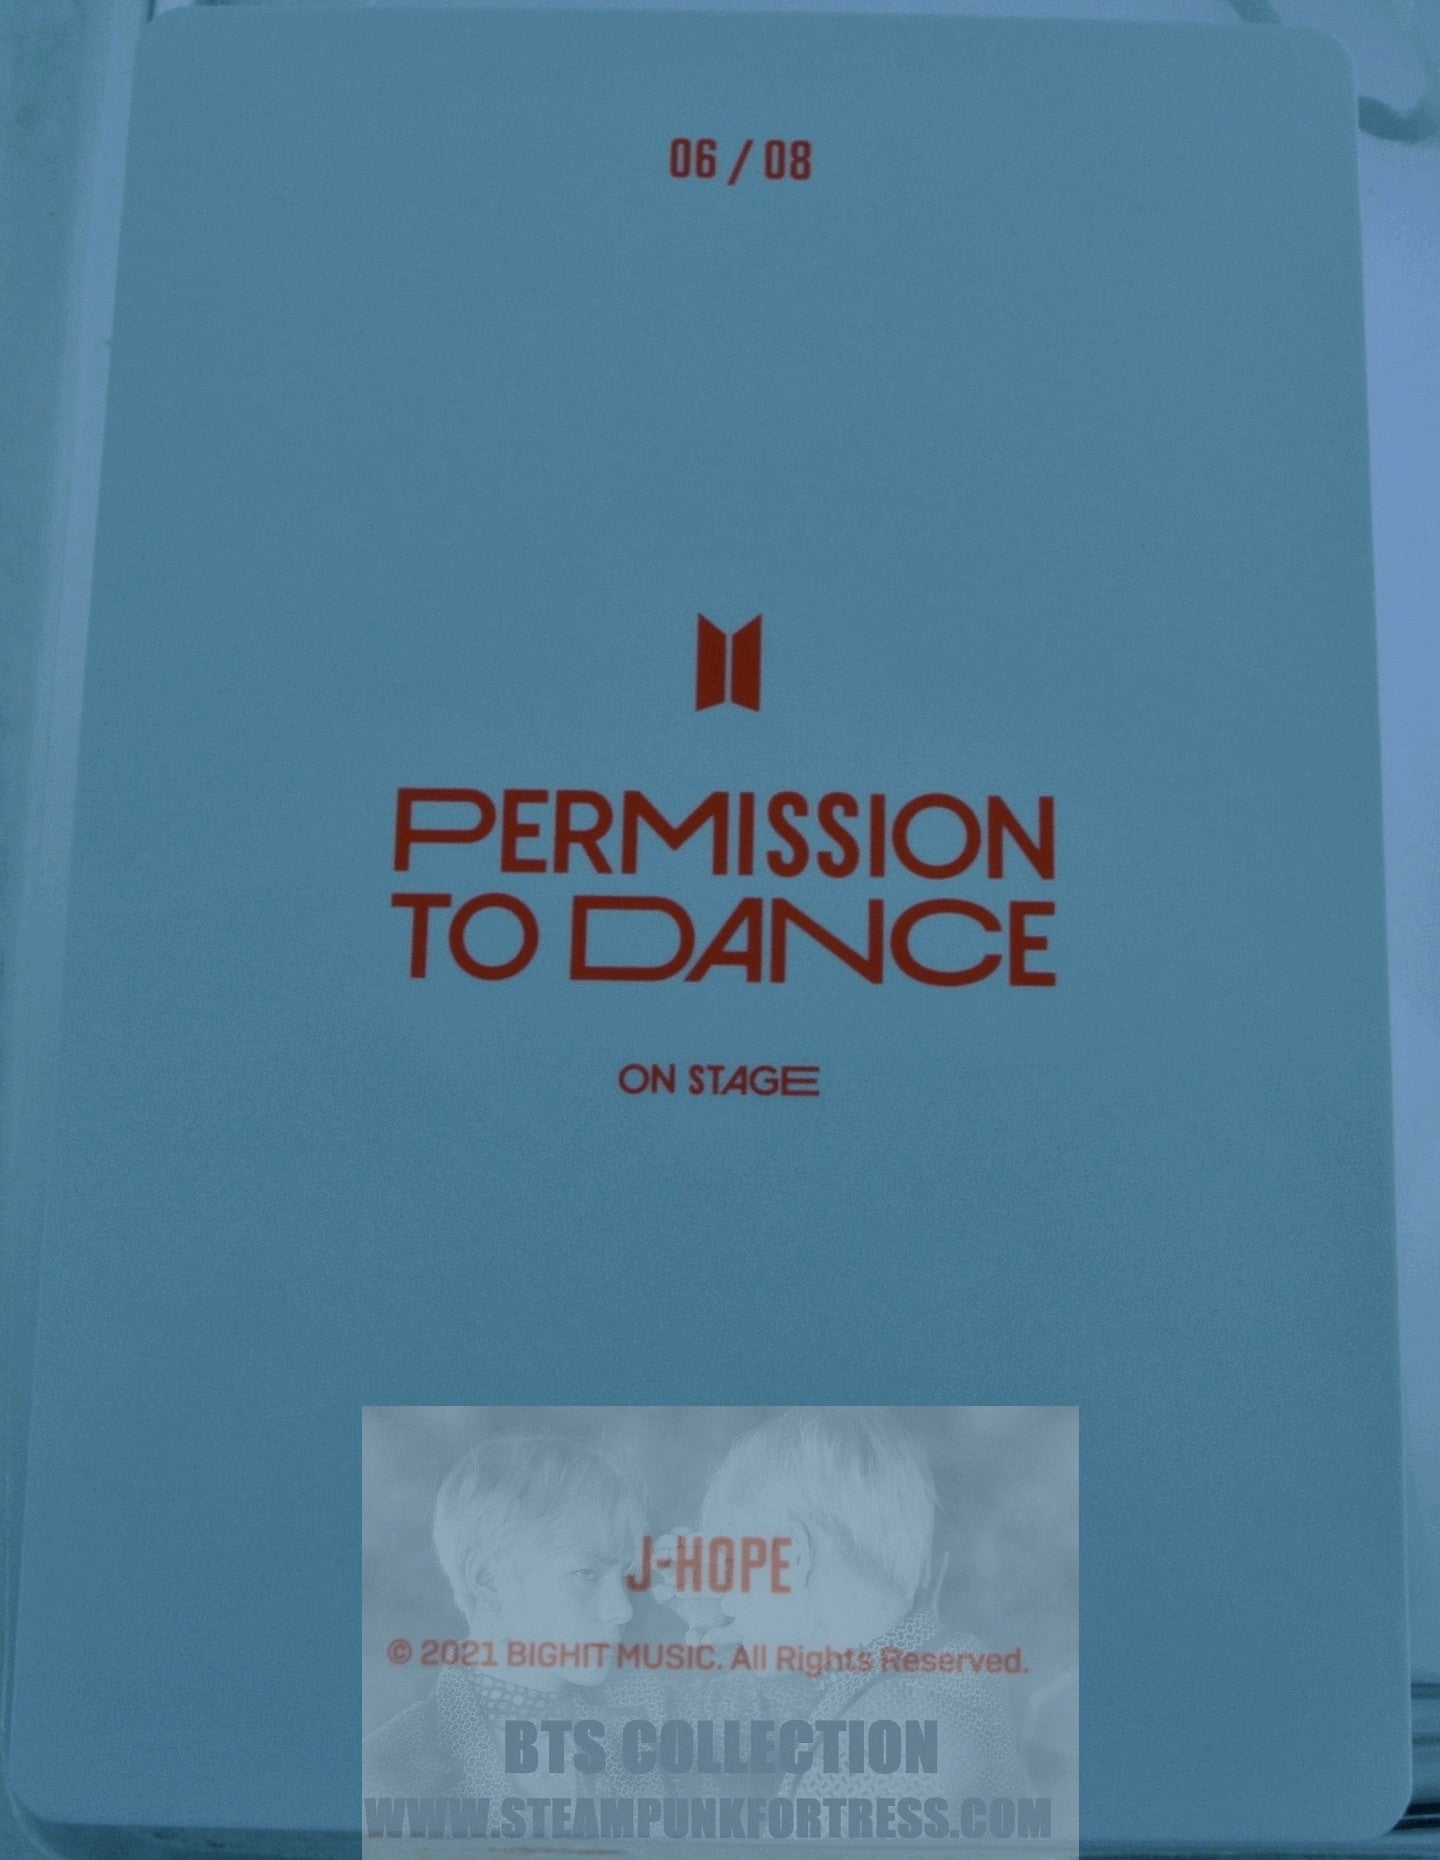 BTS J-HOPE JUNG HOSEOK HO-SEOK JHOPE 2021 PERMISSION TO DANCE ON STAGE #6 OF 8 PHOTOCARD PHOTO CARD PTD PC NEW OFFICIAL MERCHANDISE